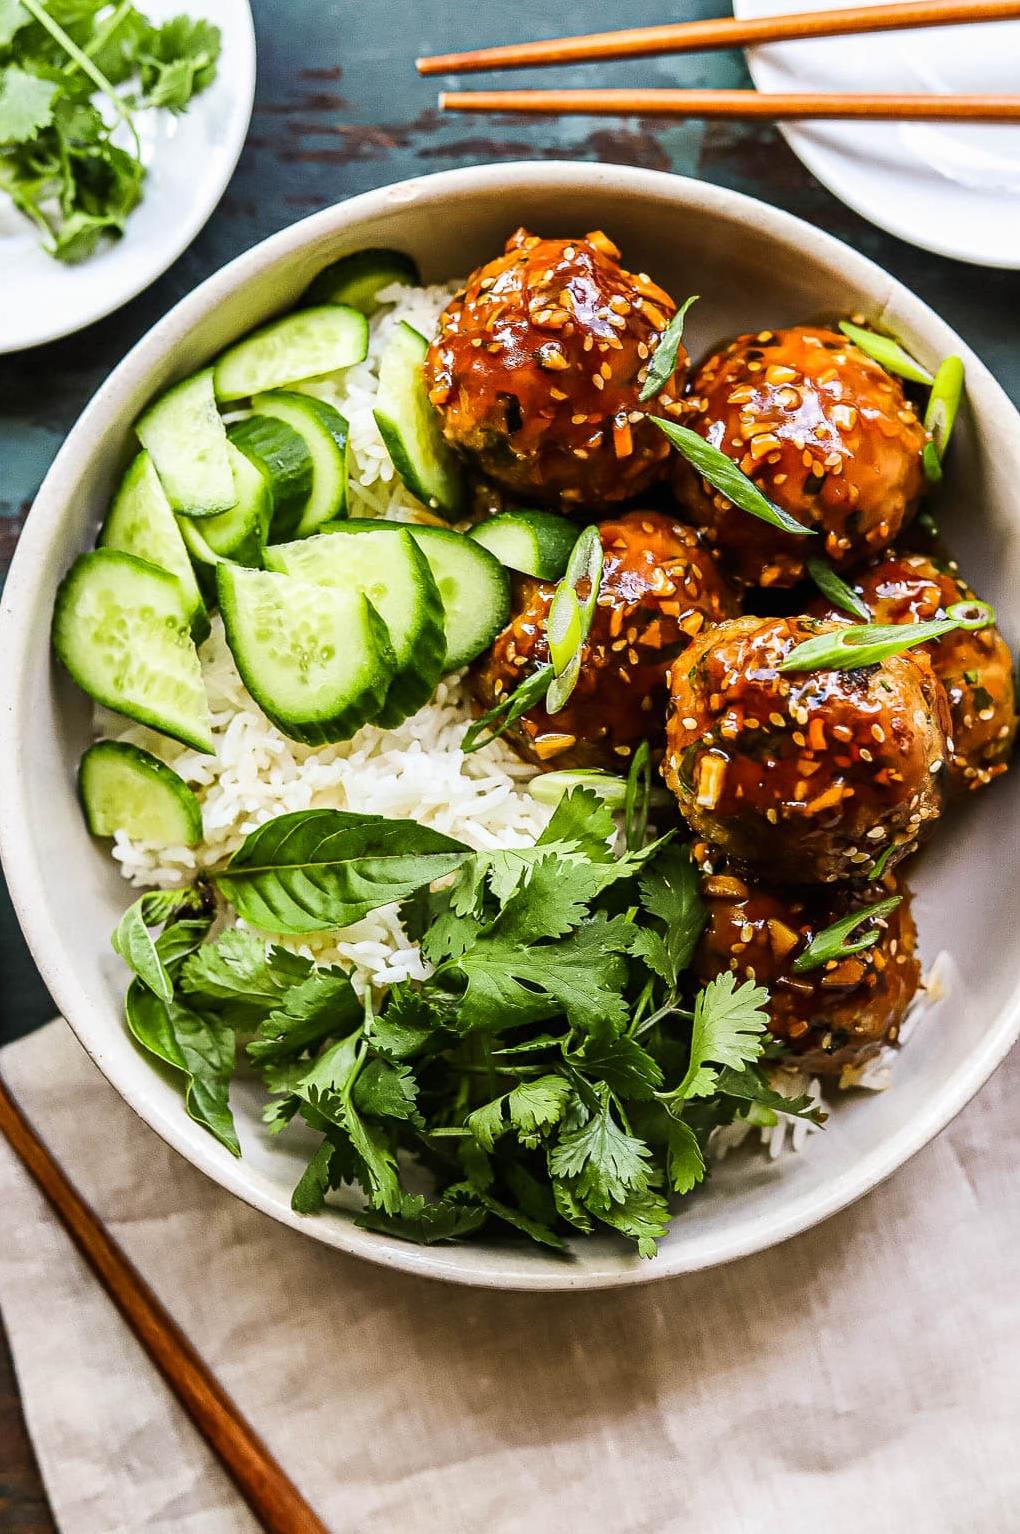  These meatballs are easy to make and perfect for meal prep.